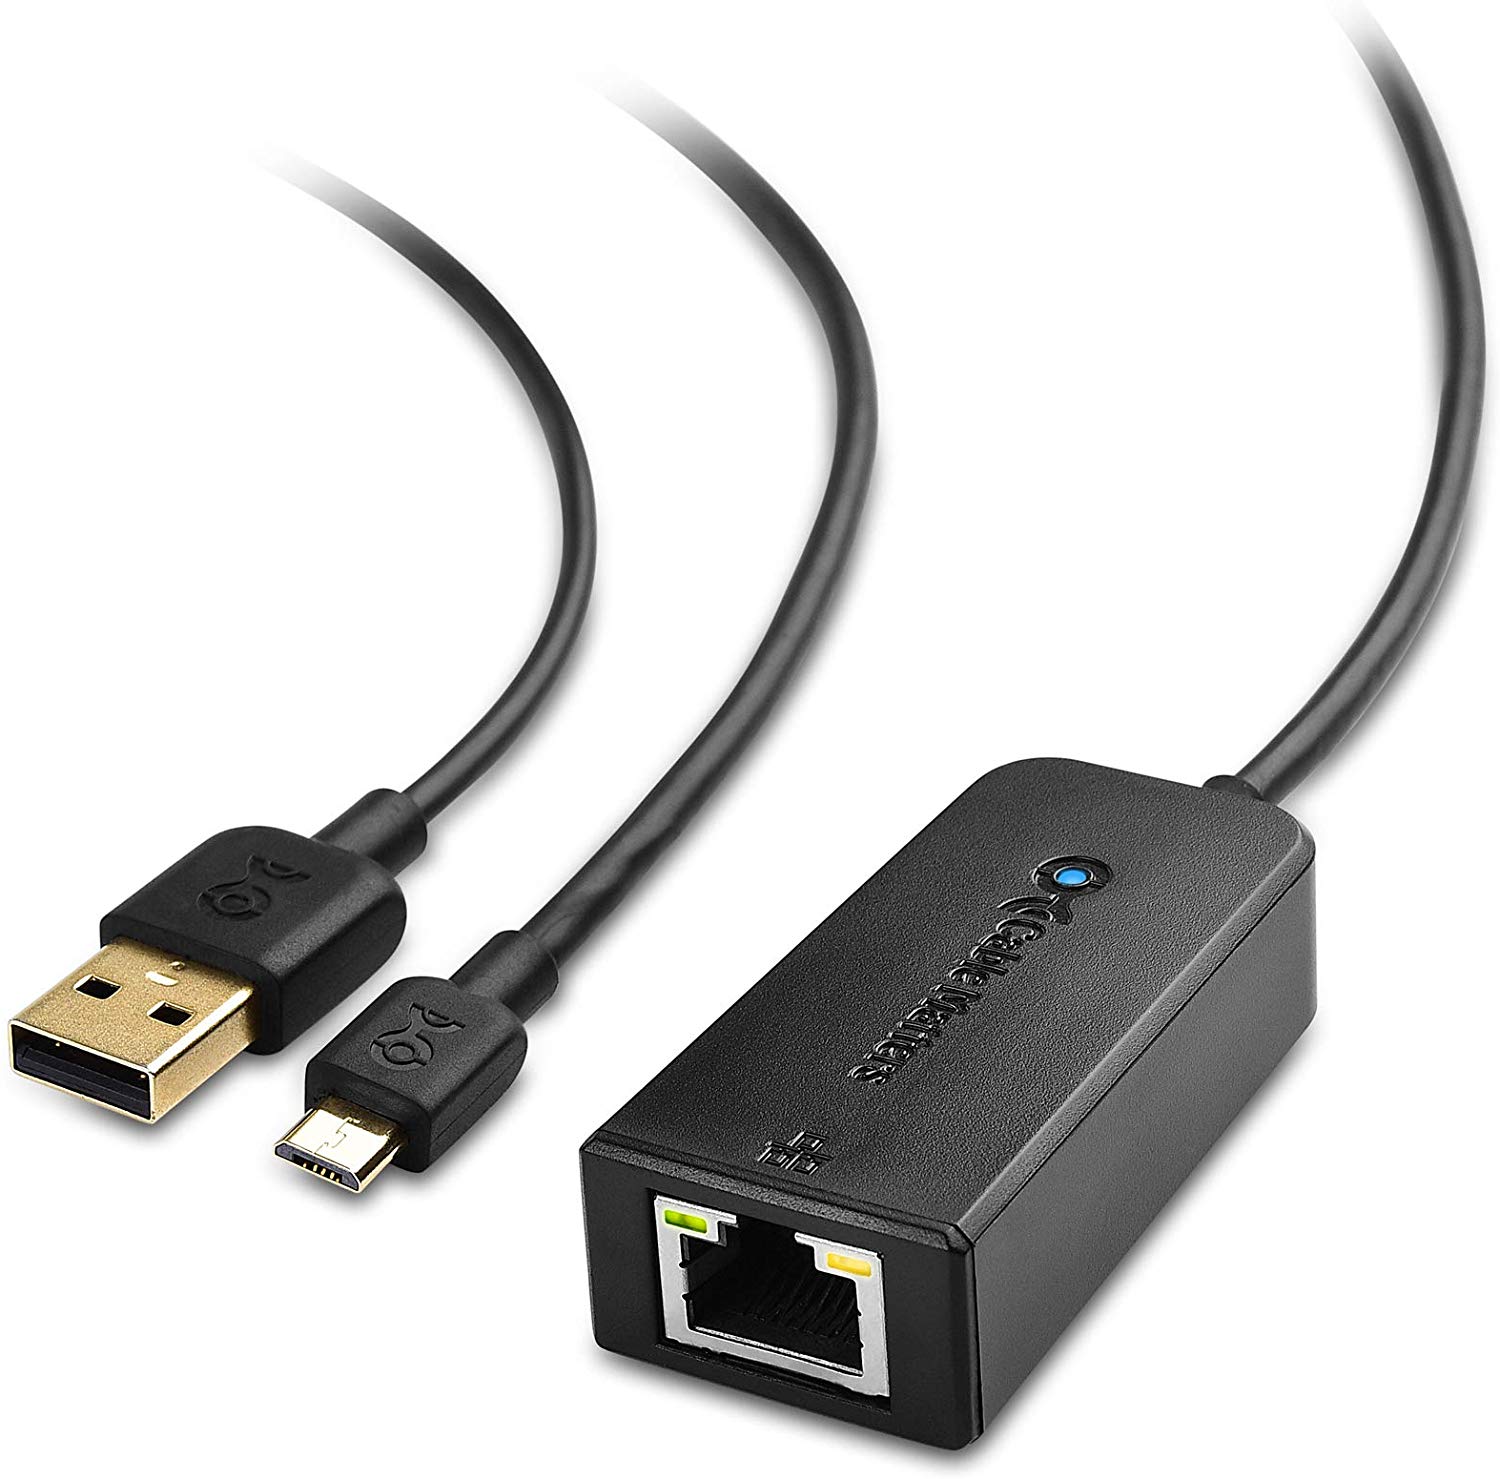 Cable Matters ethernet adapter